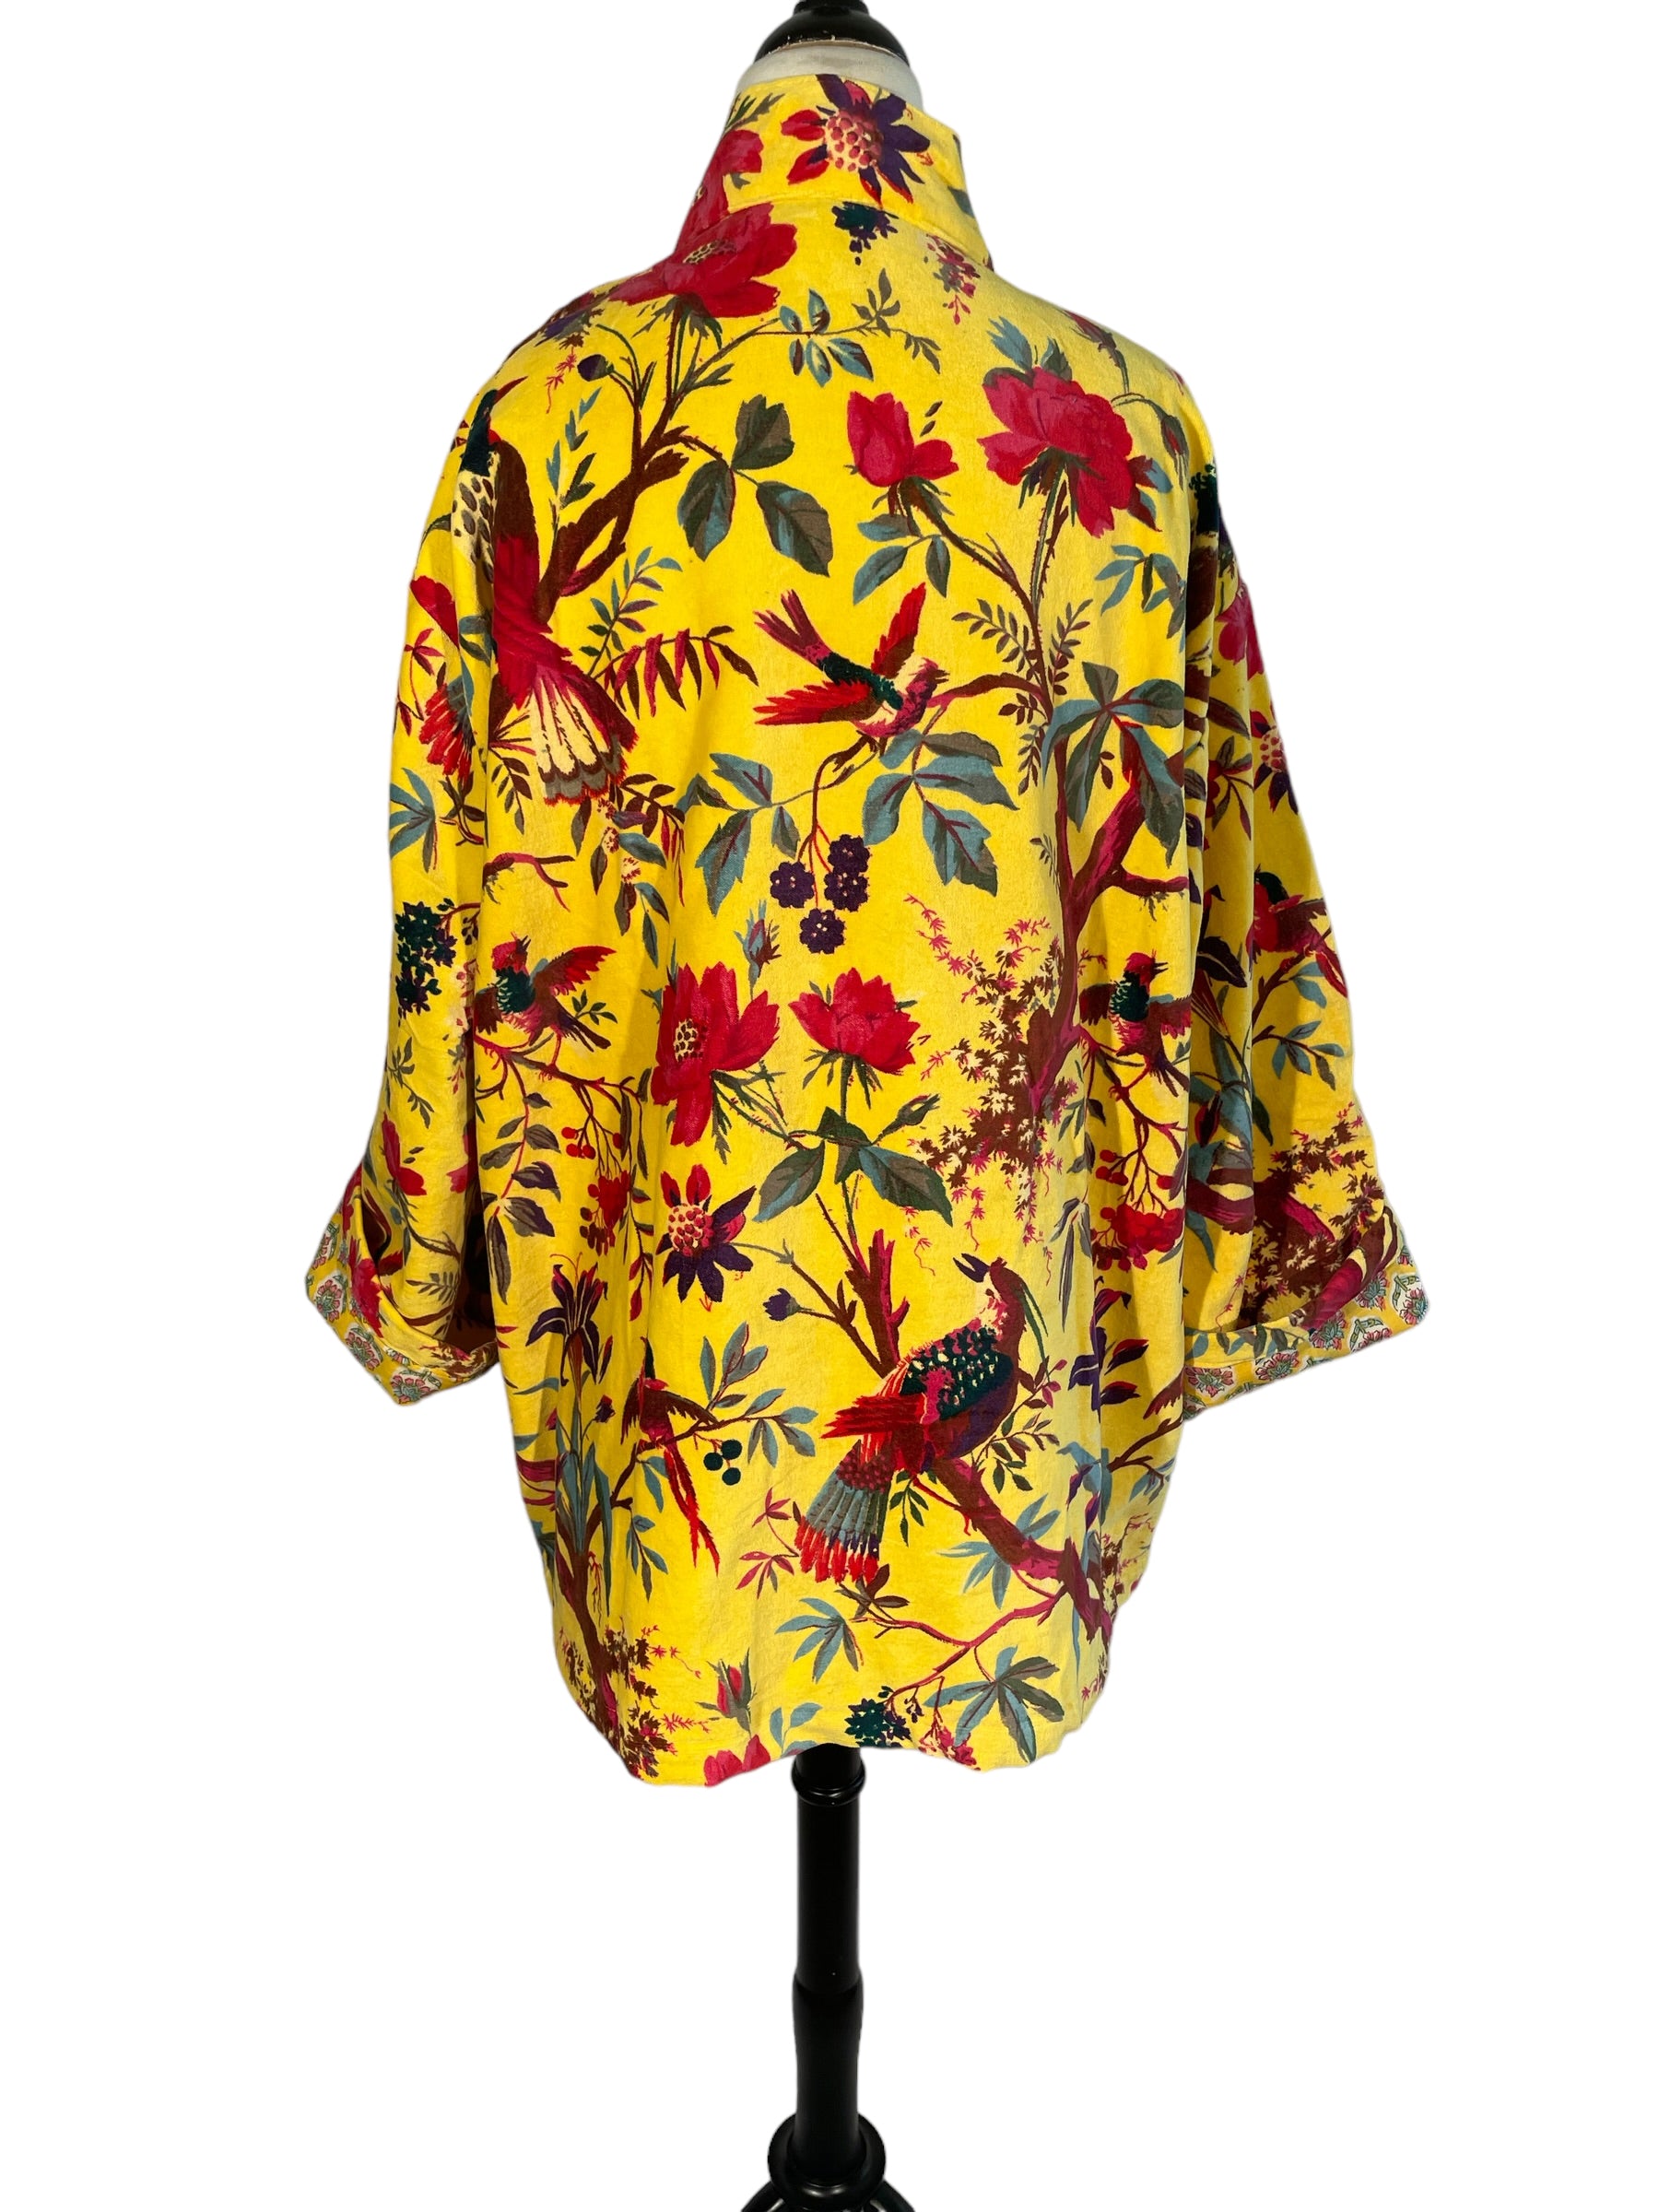 Wrap Me Up in Velvet - Bright Yellow Floral